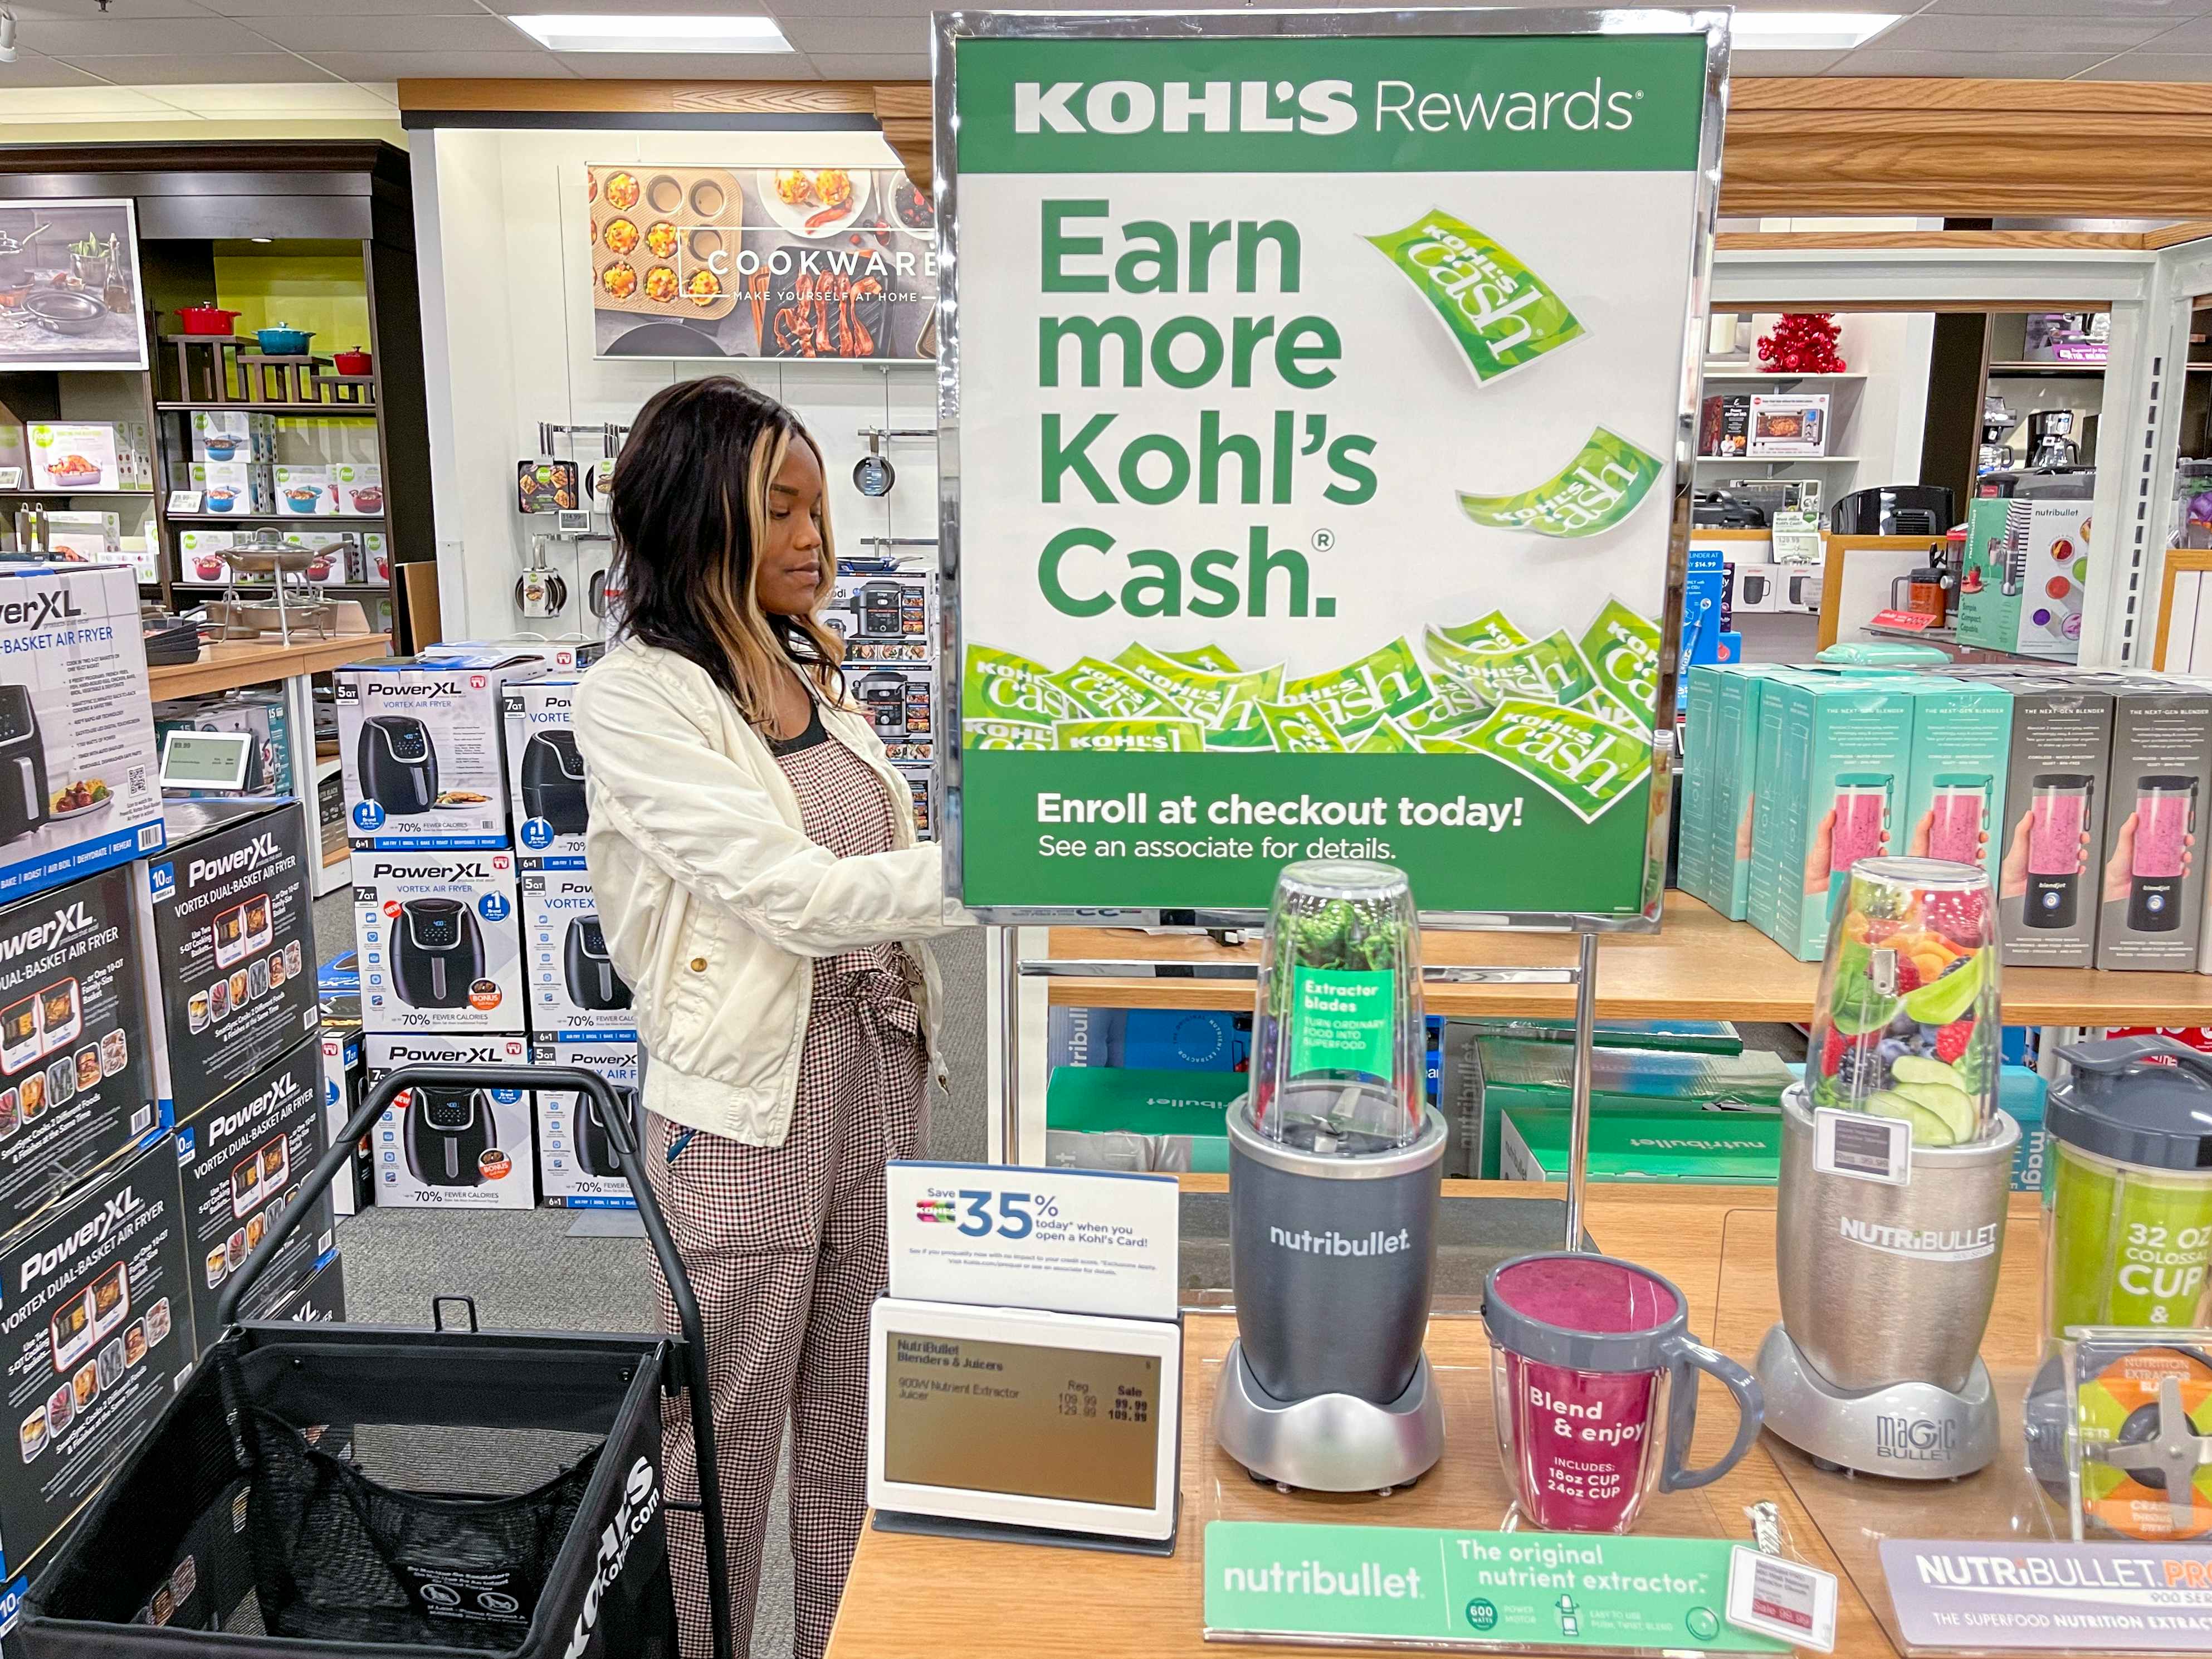 A woman shopping next to a Kohl's cash sign on a display of Nutribullet kitchen appliances at Kohl's.